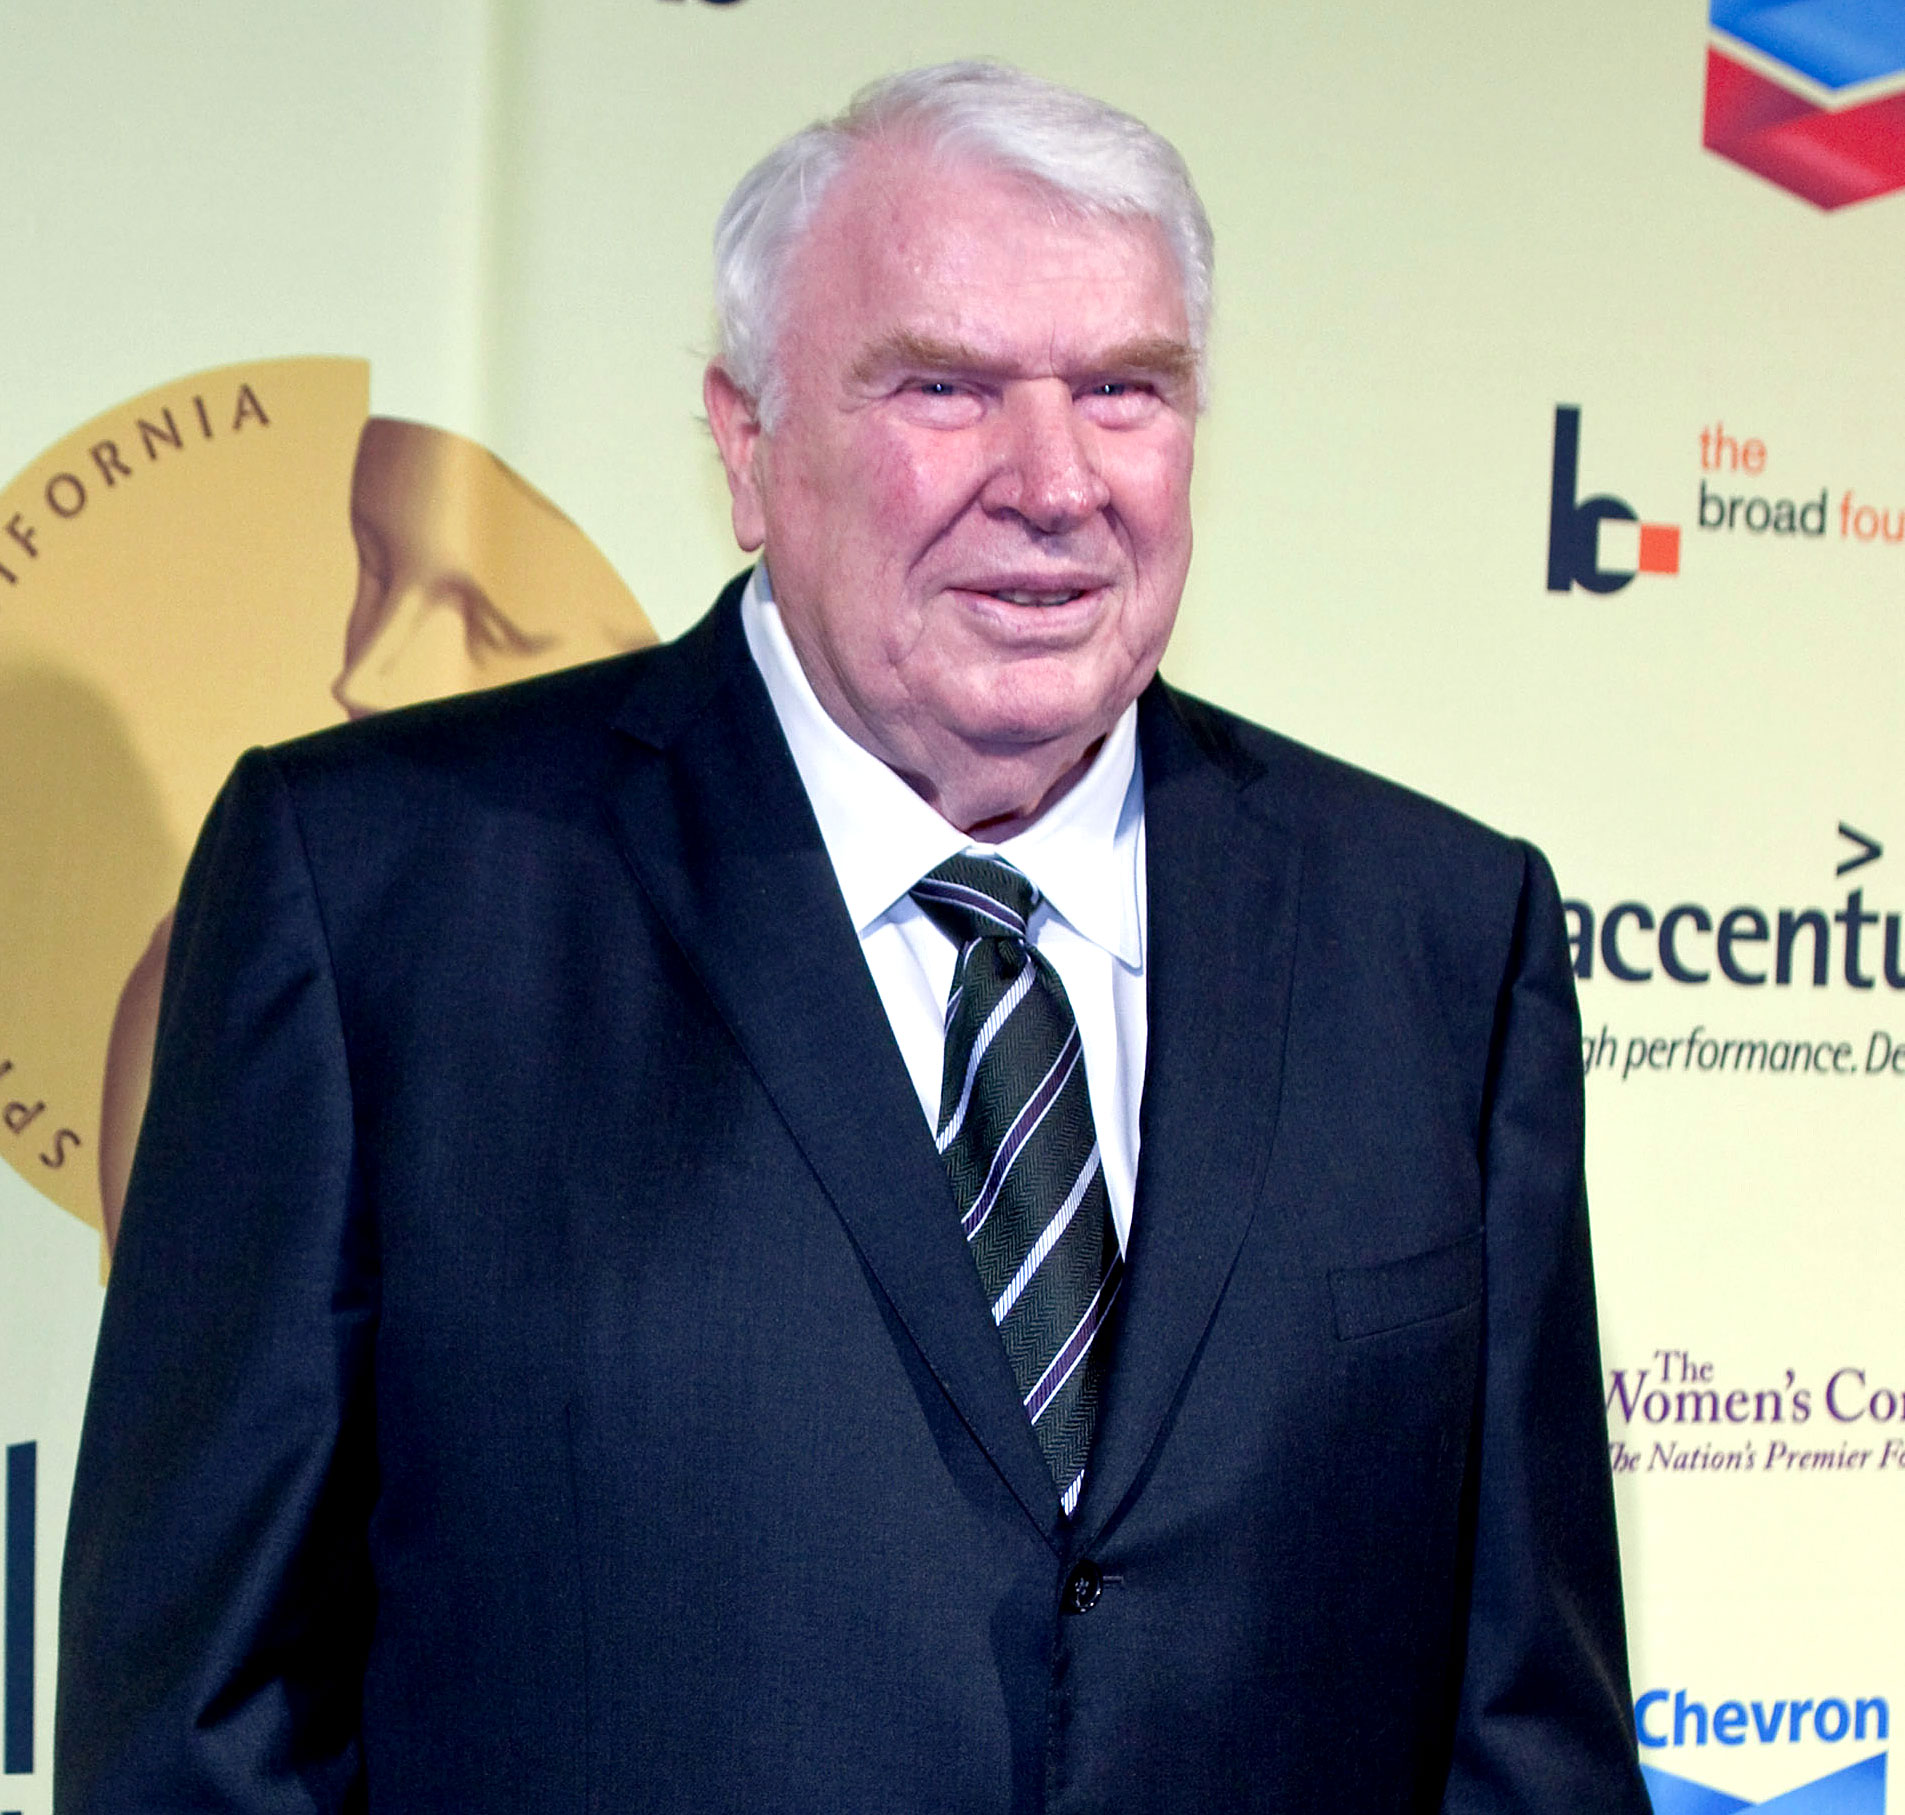 John Madden, football legend and video game icon, passes away